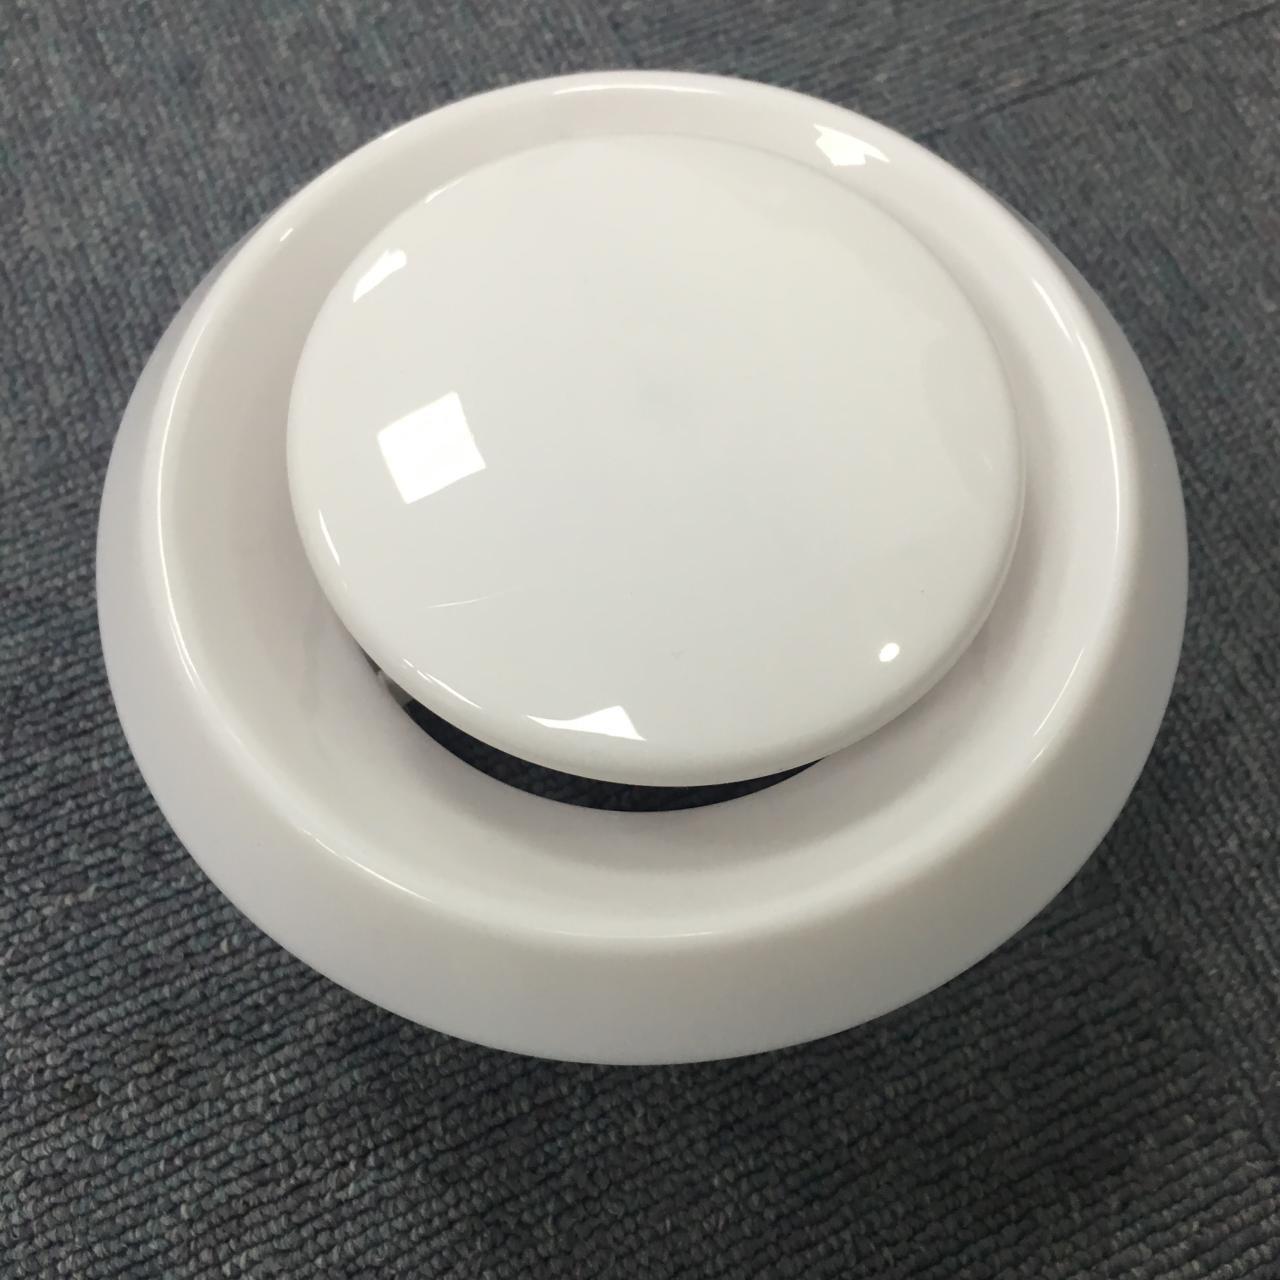 Ceiling Mounted Air Disc Valve Toilet Round Air Diffuser Made of GI